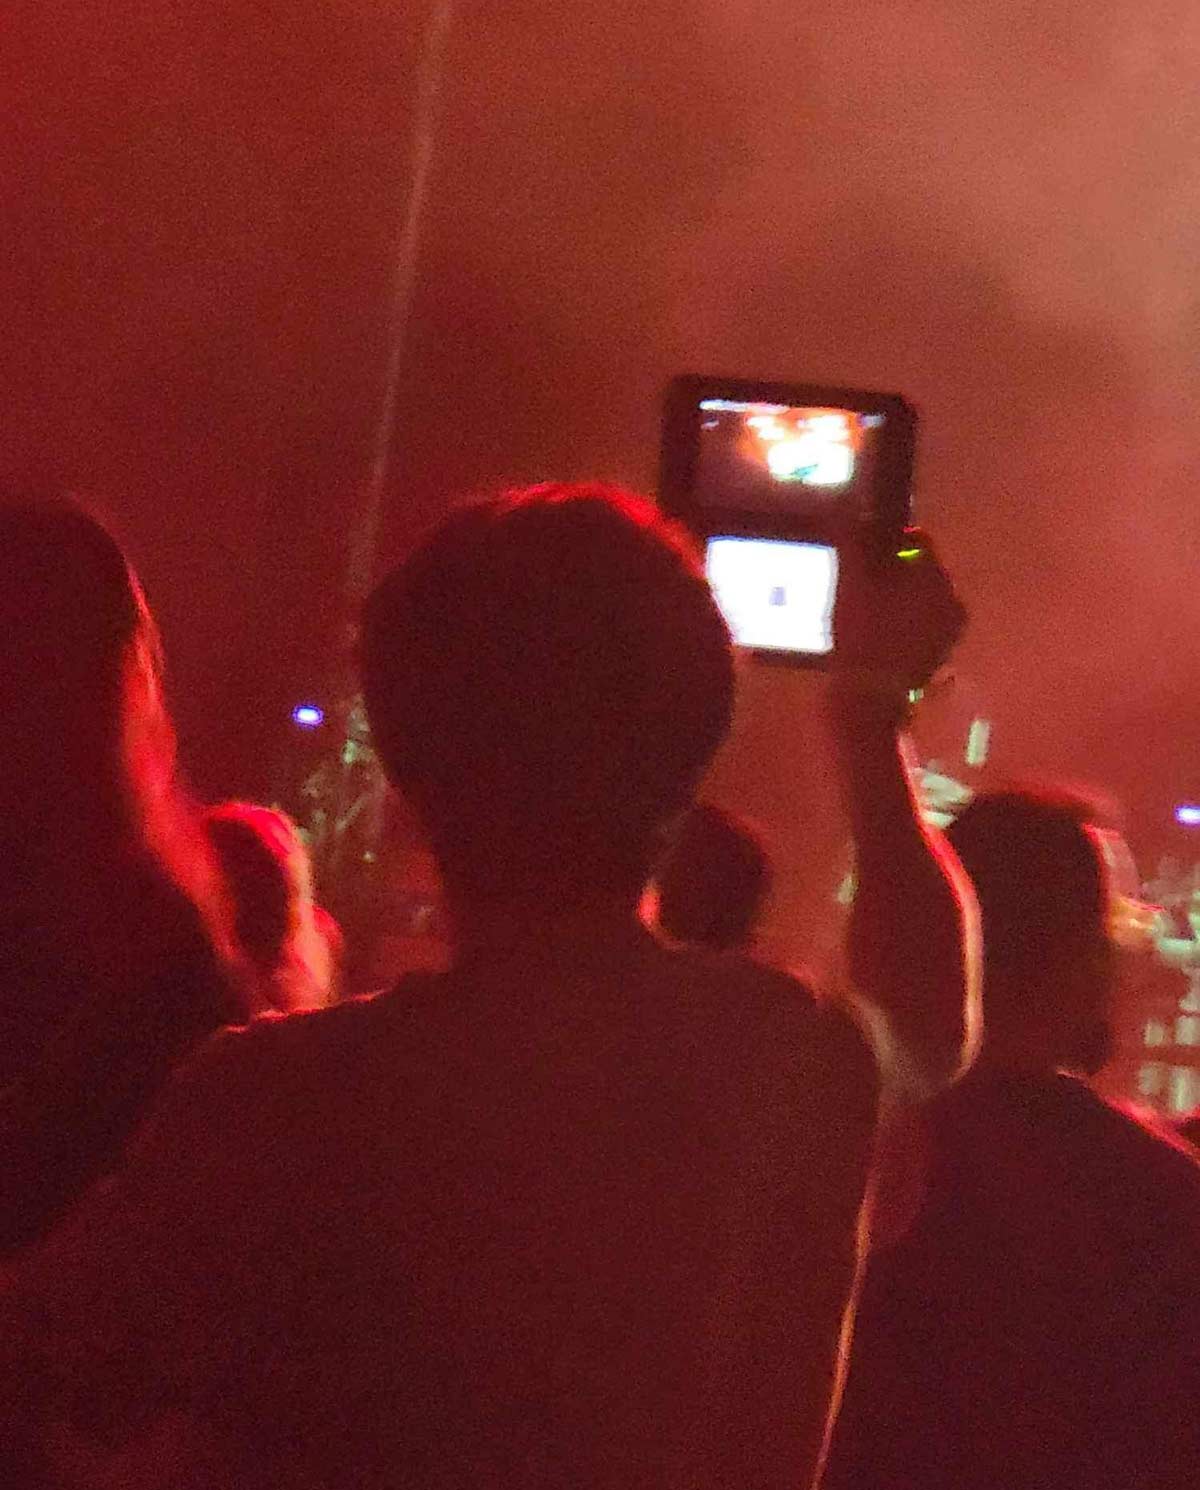 My girlfriend is at a concert and sent me this pic